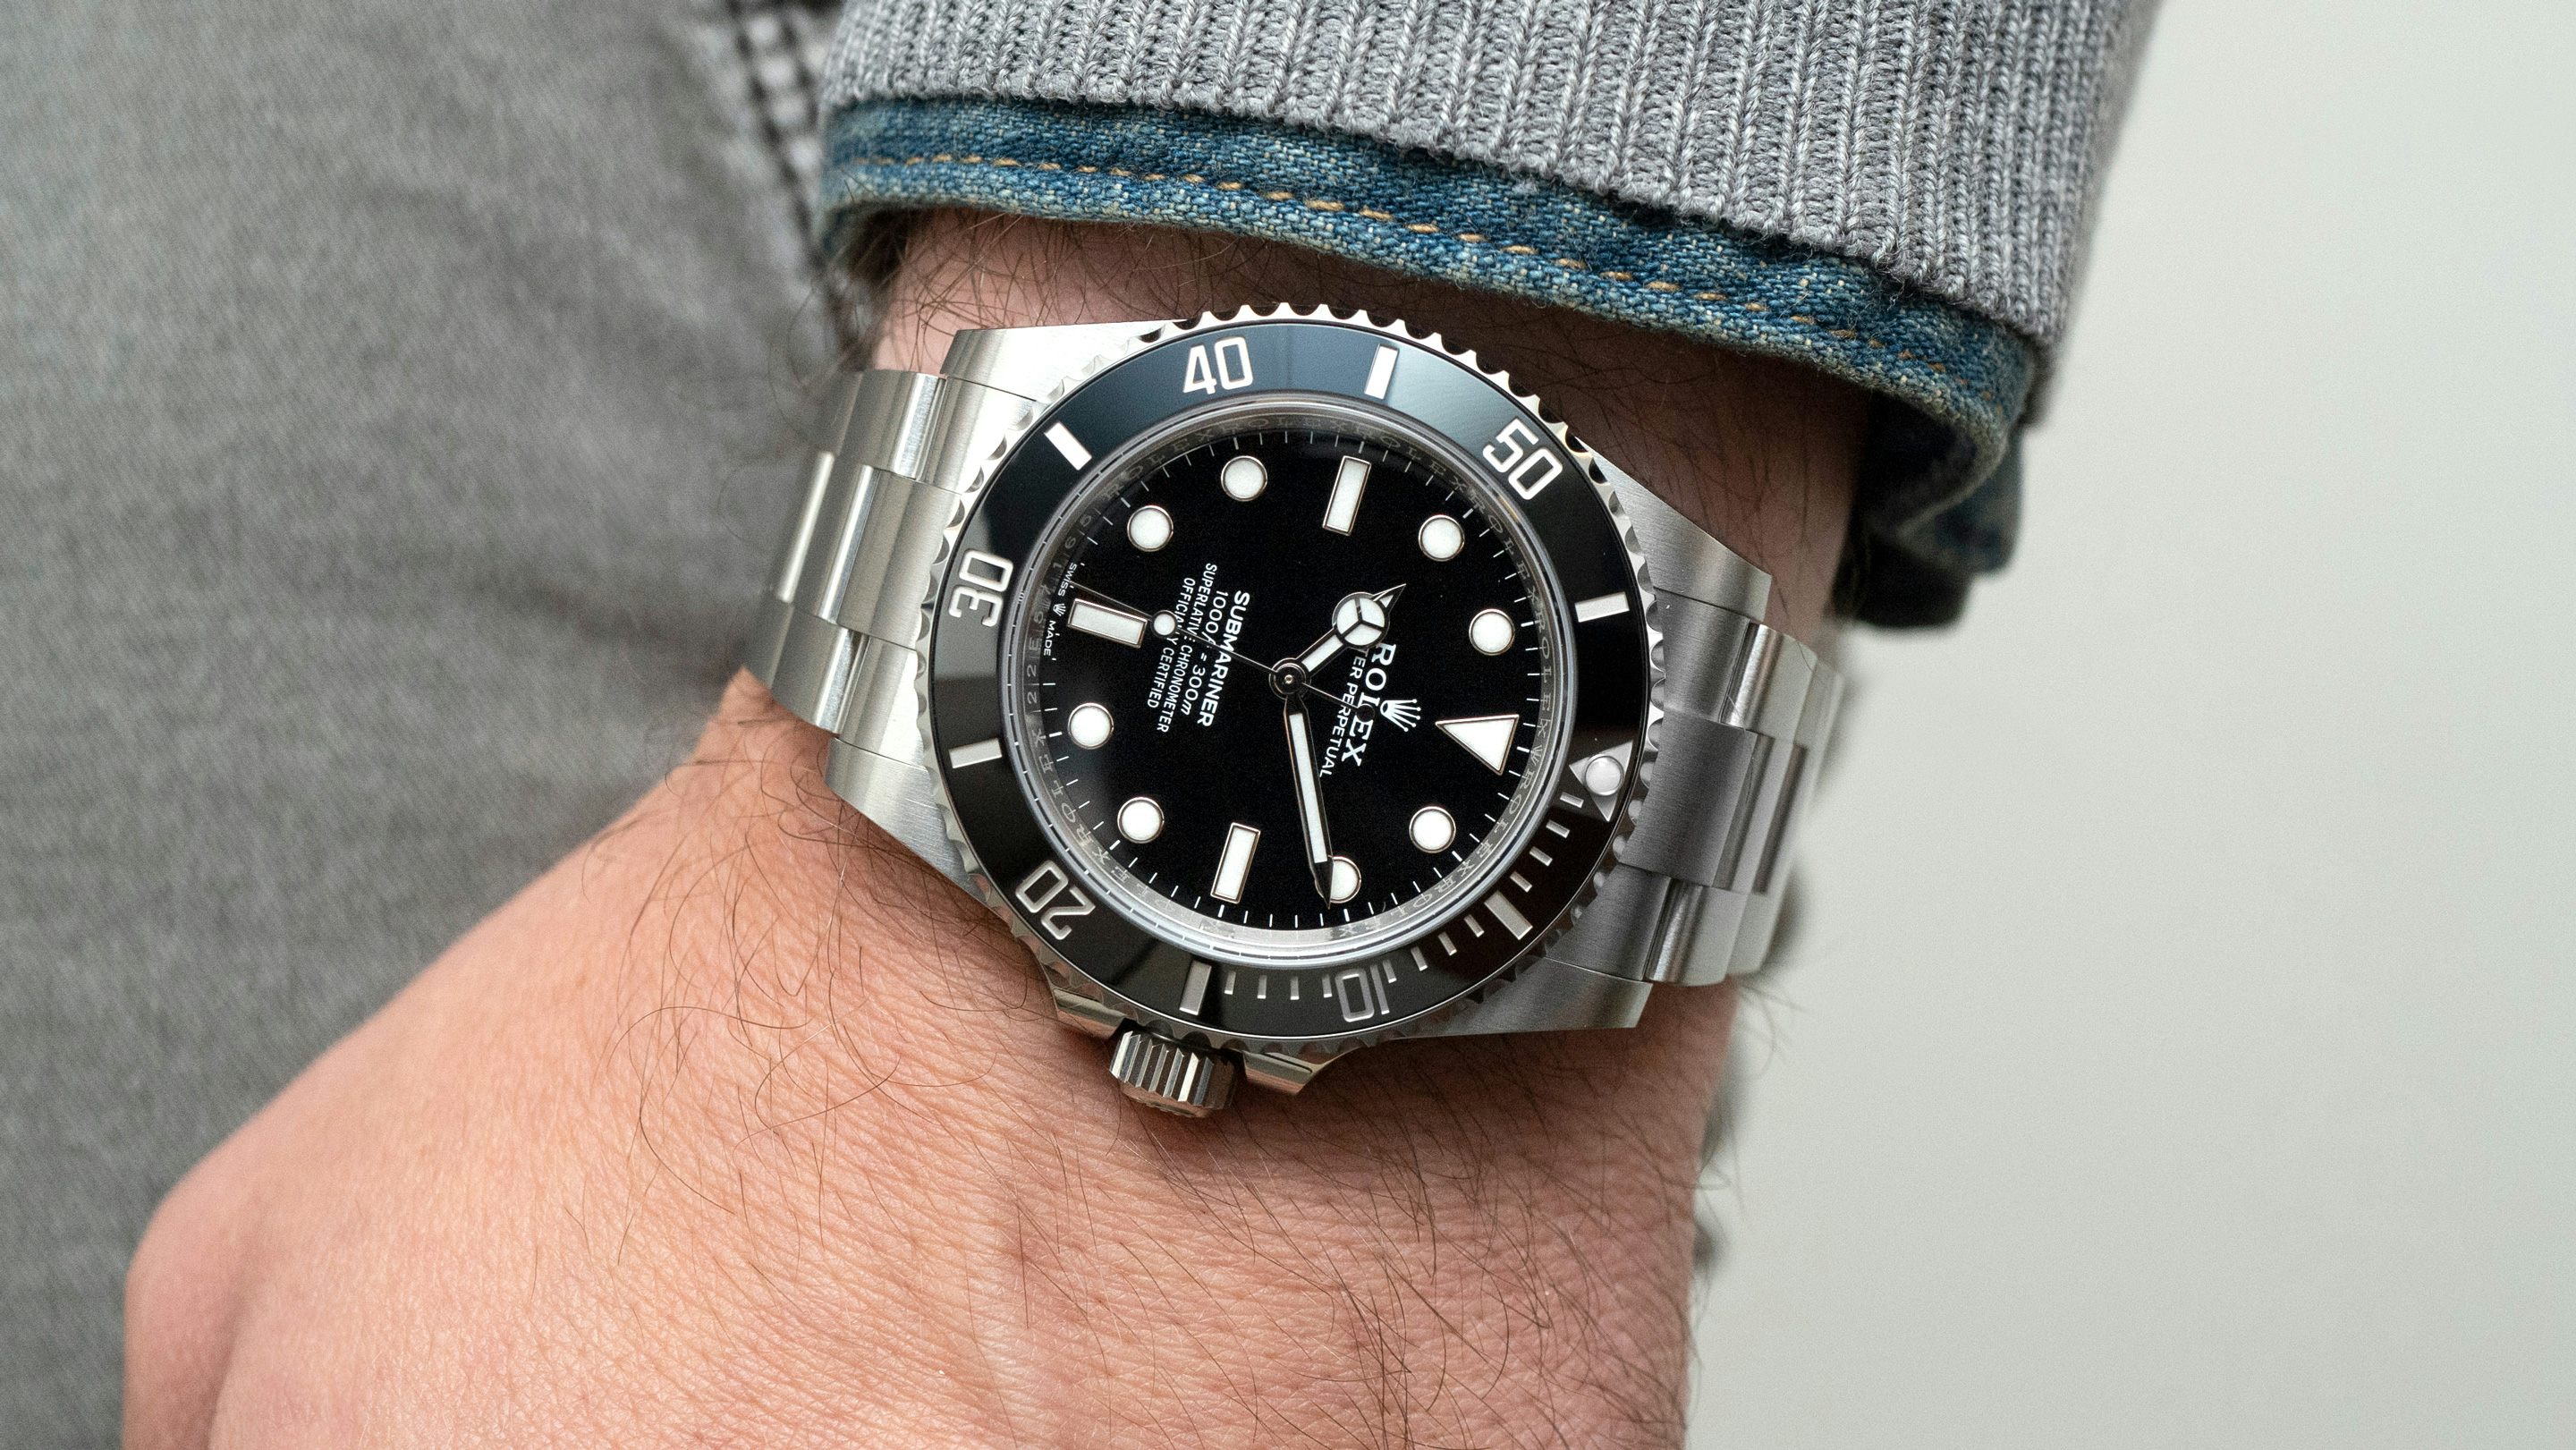 In-Depth: Five Things I Learned From The 2020 Rolex Releases - Hodinkee